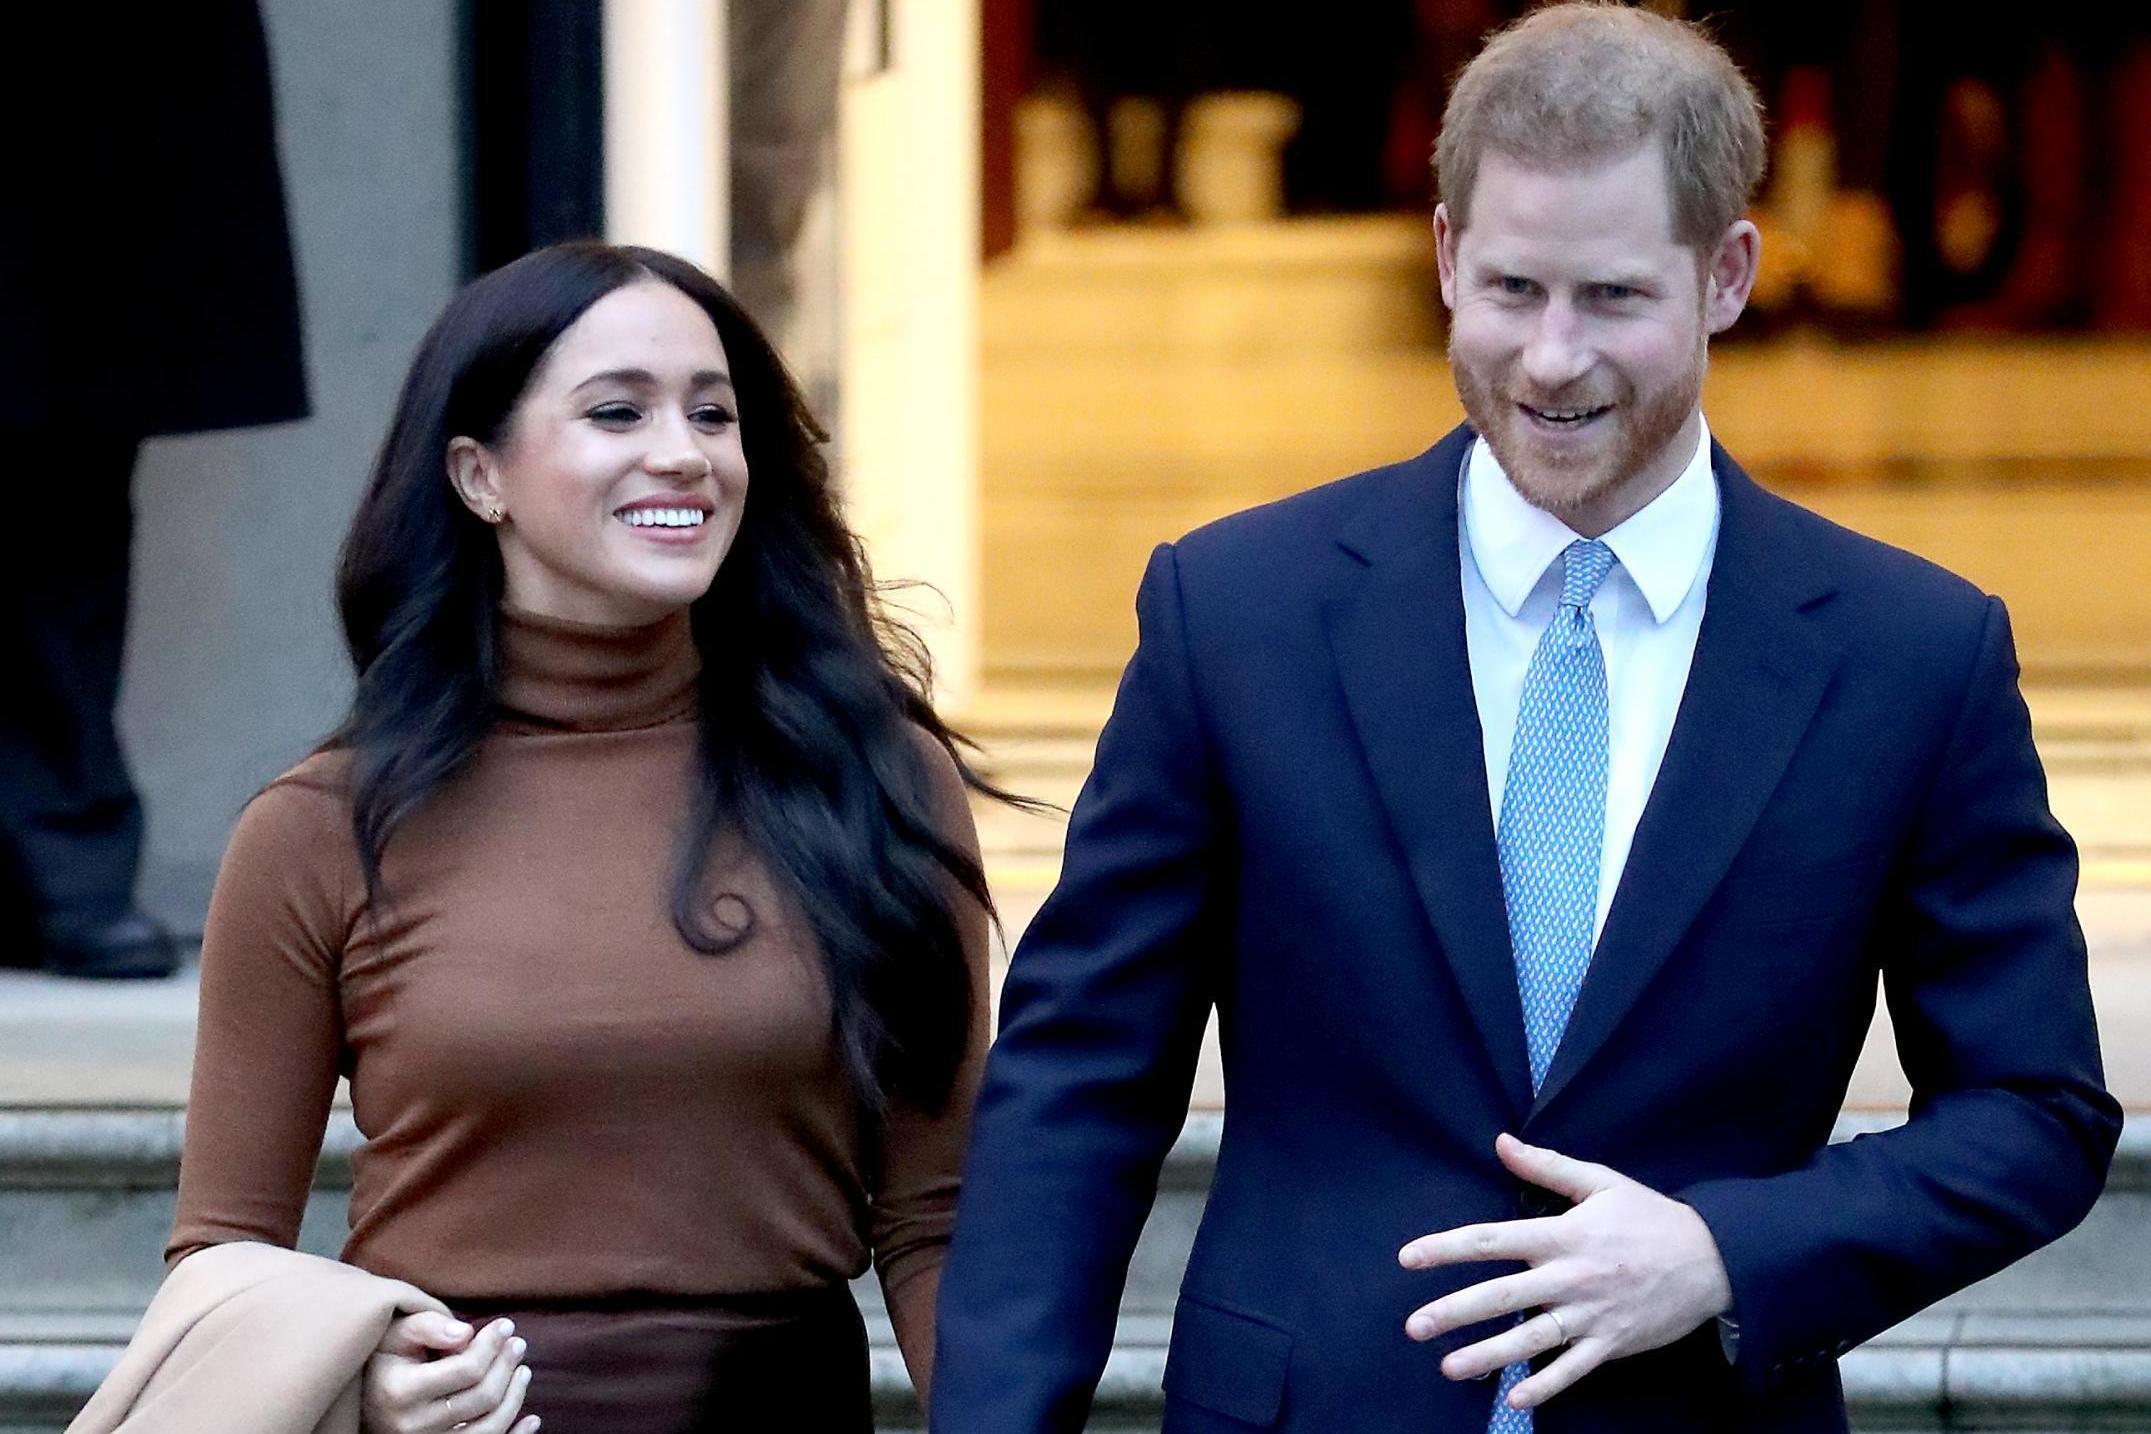 Prince Harry and Meghan Markle announcement: Fans react to news royal couple are stepping down